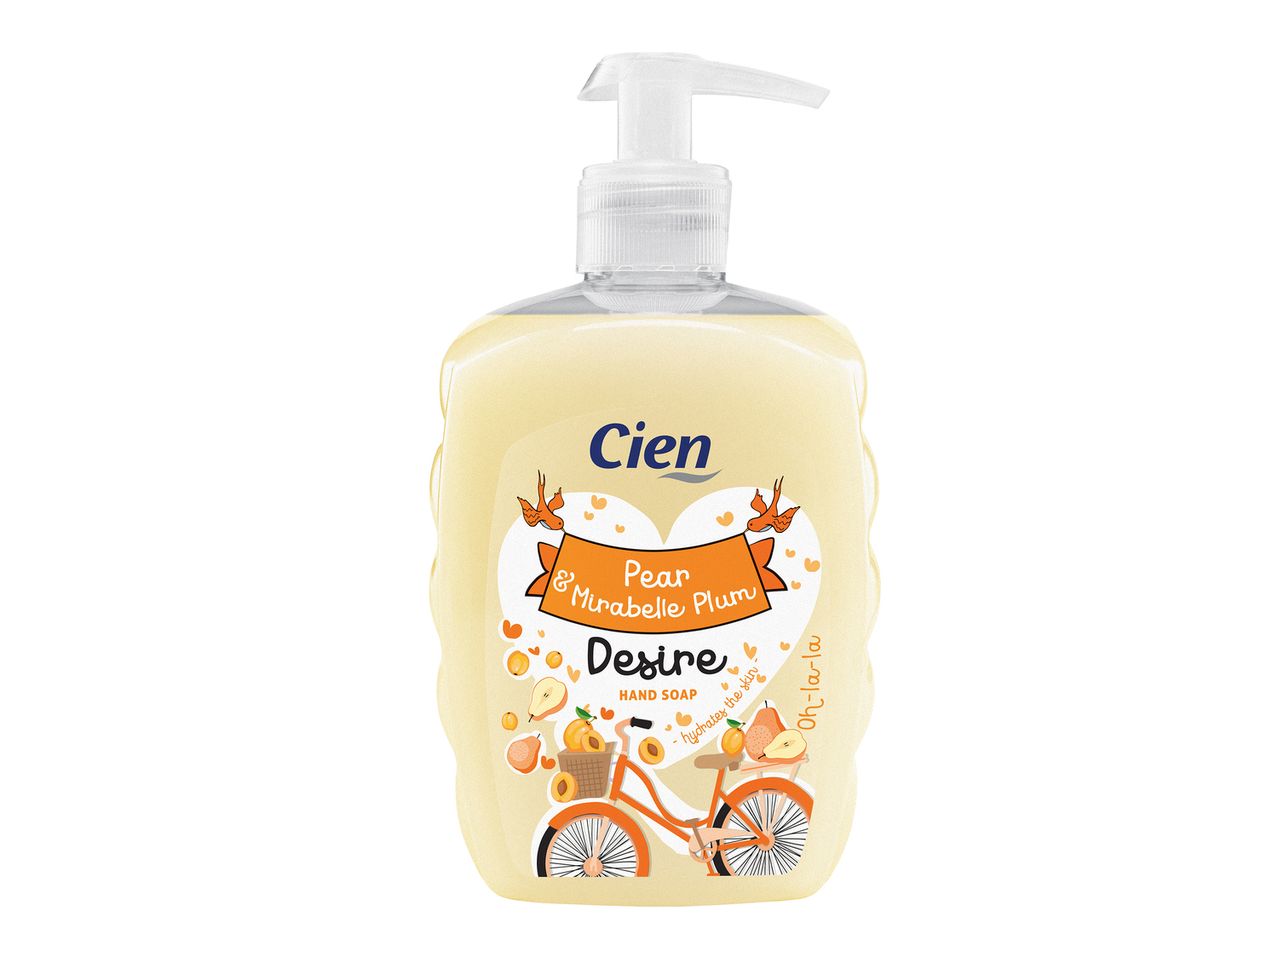 Go to full screen view: Cien Hand Soap - Image 3